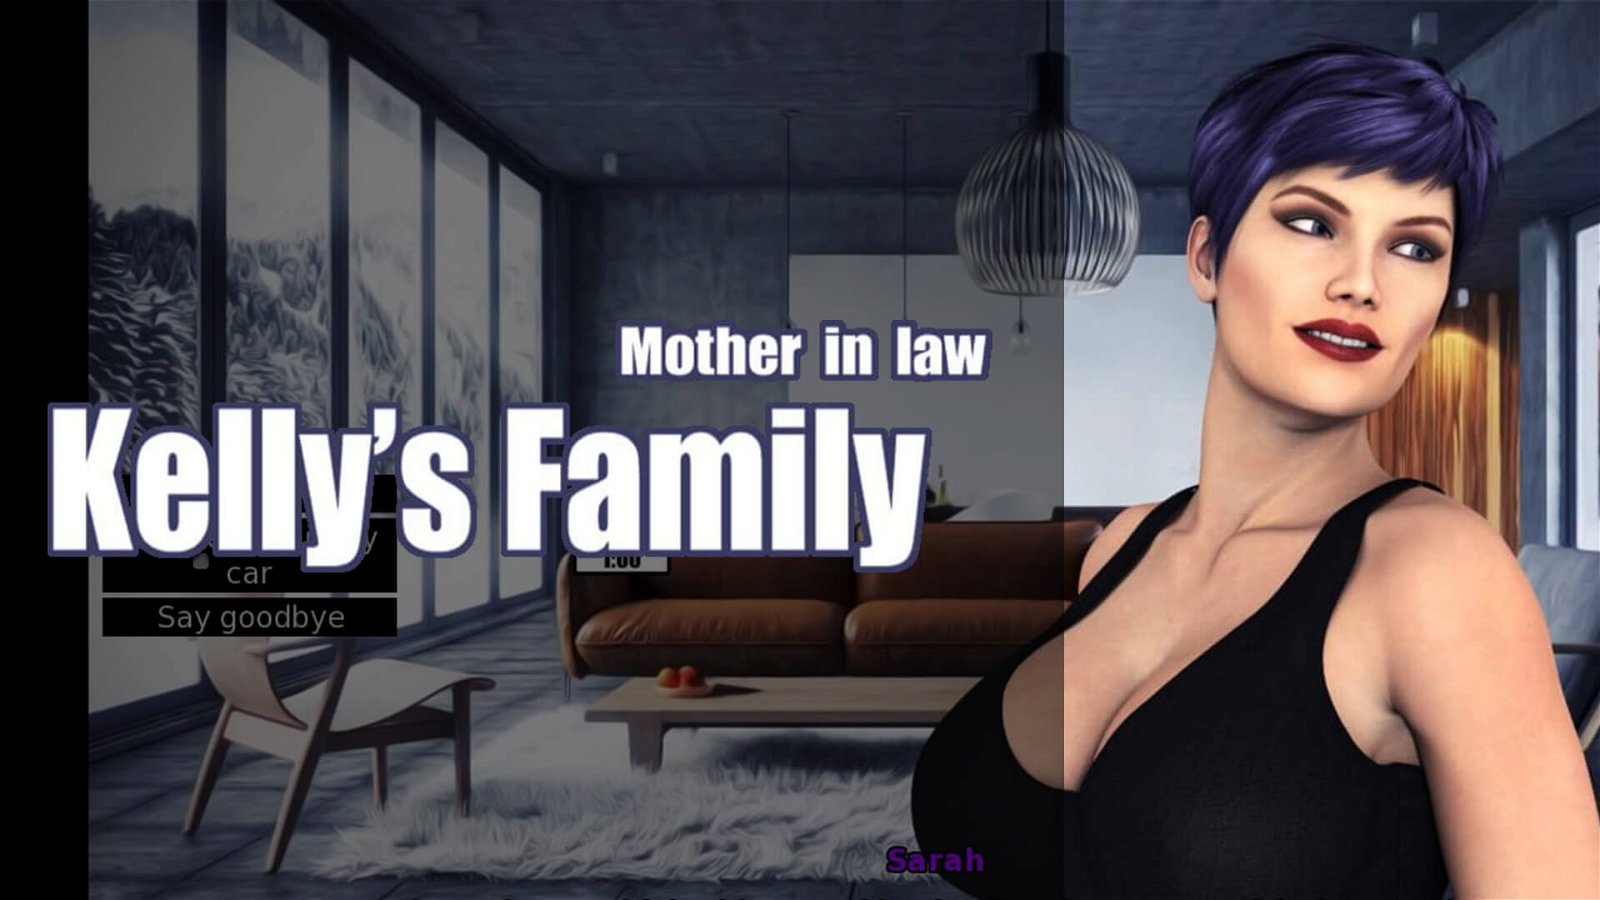 download-kelly-family-apk-v4-2-for-android-latest